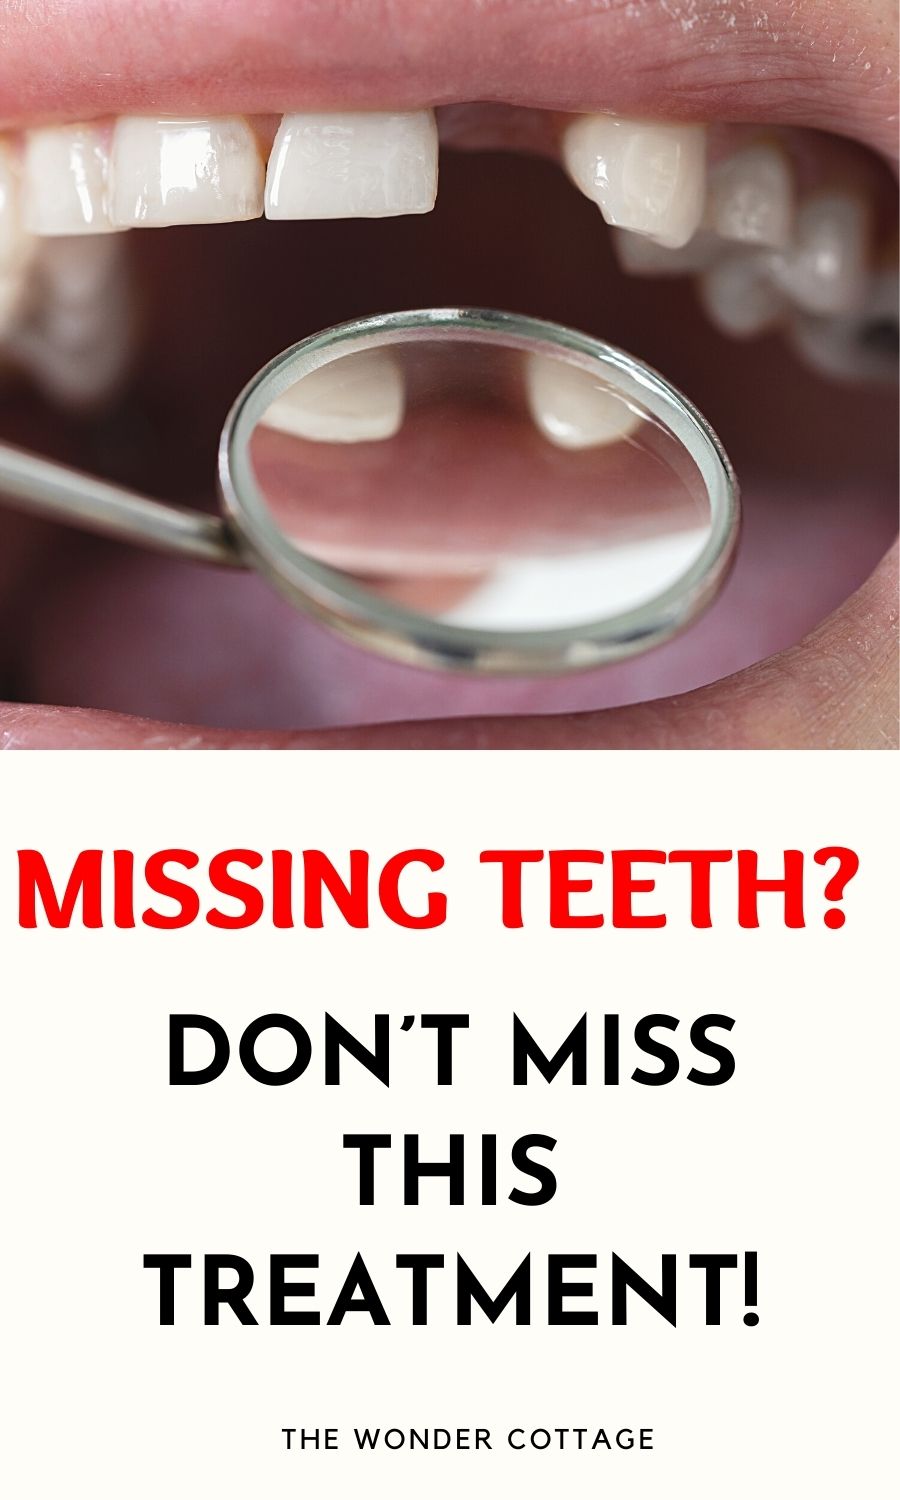 Missing Teeth? Don’t Miss This Treatment!